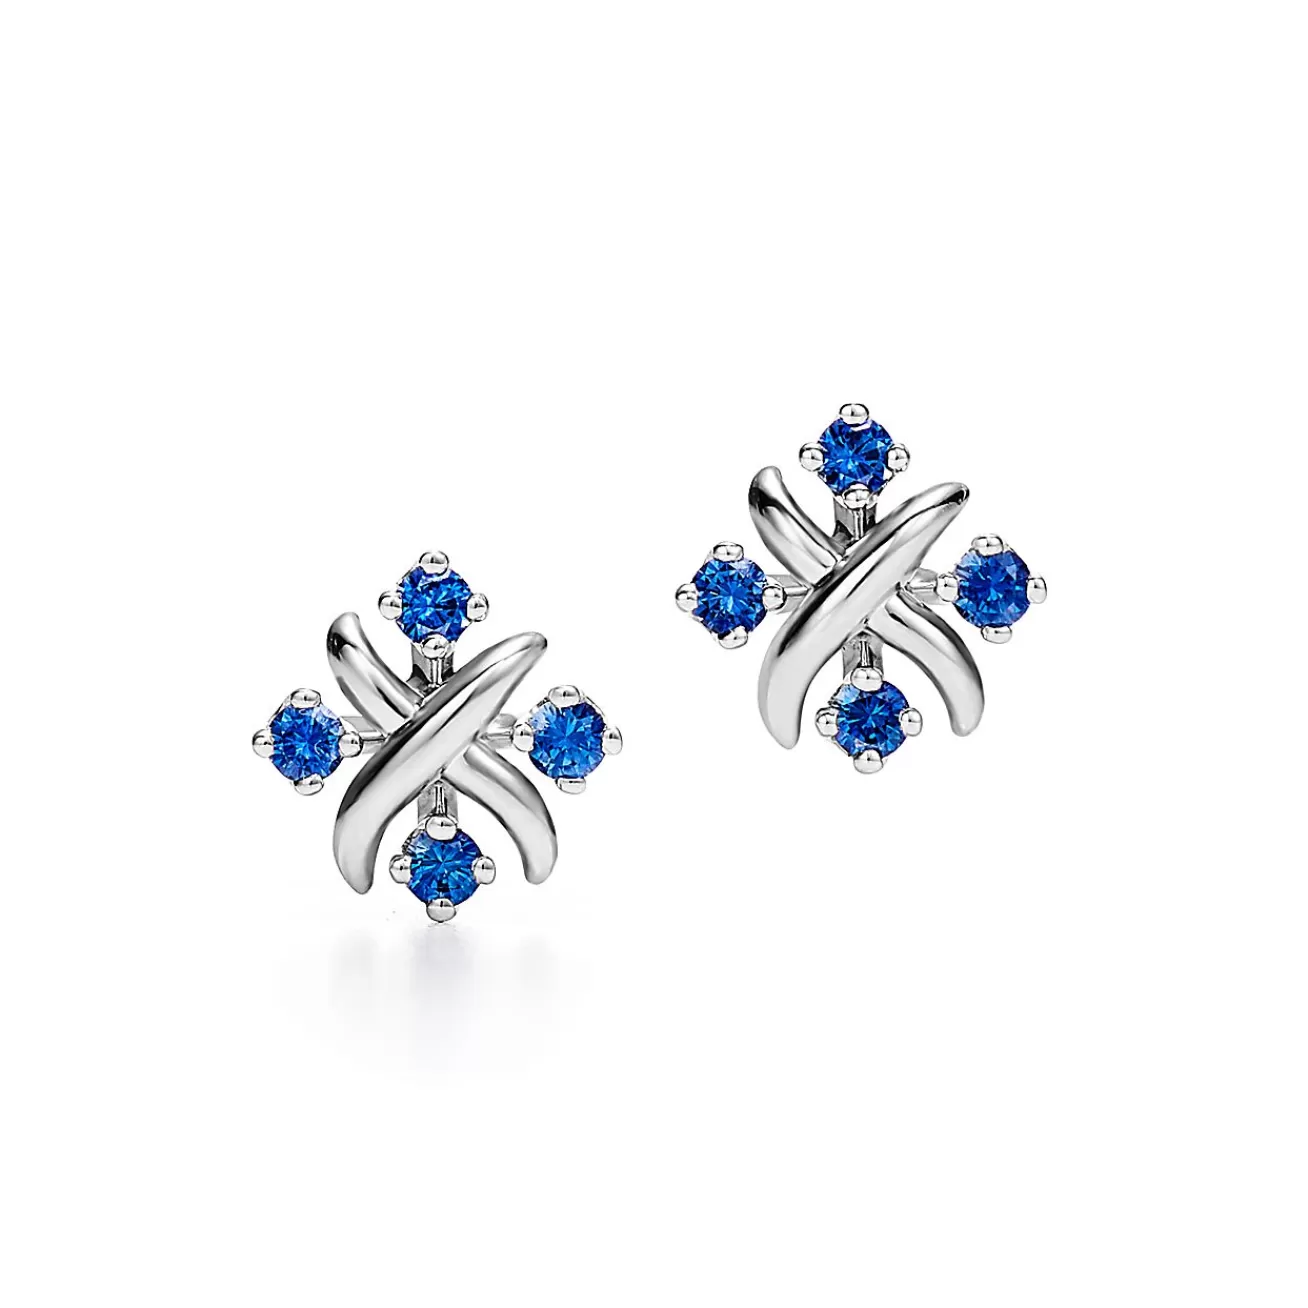 Tiffany & Co. Schlumberger® Lynn earrings in platinum with sapphires. | ^ Earrings | Platinum Jewelry